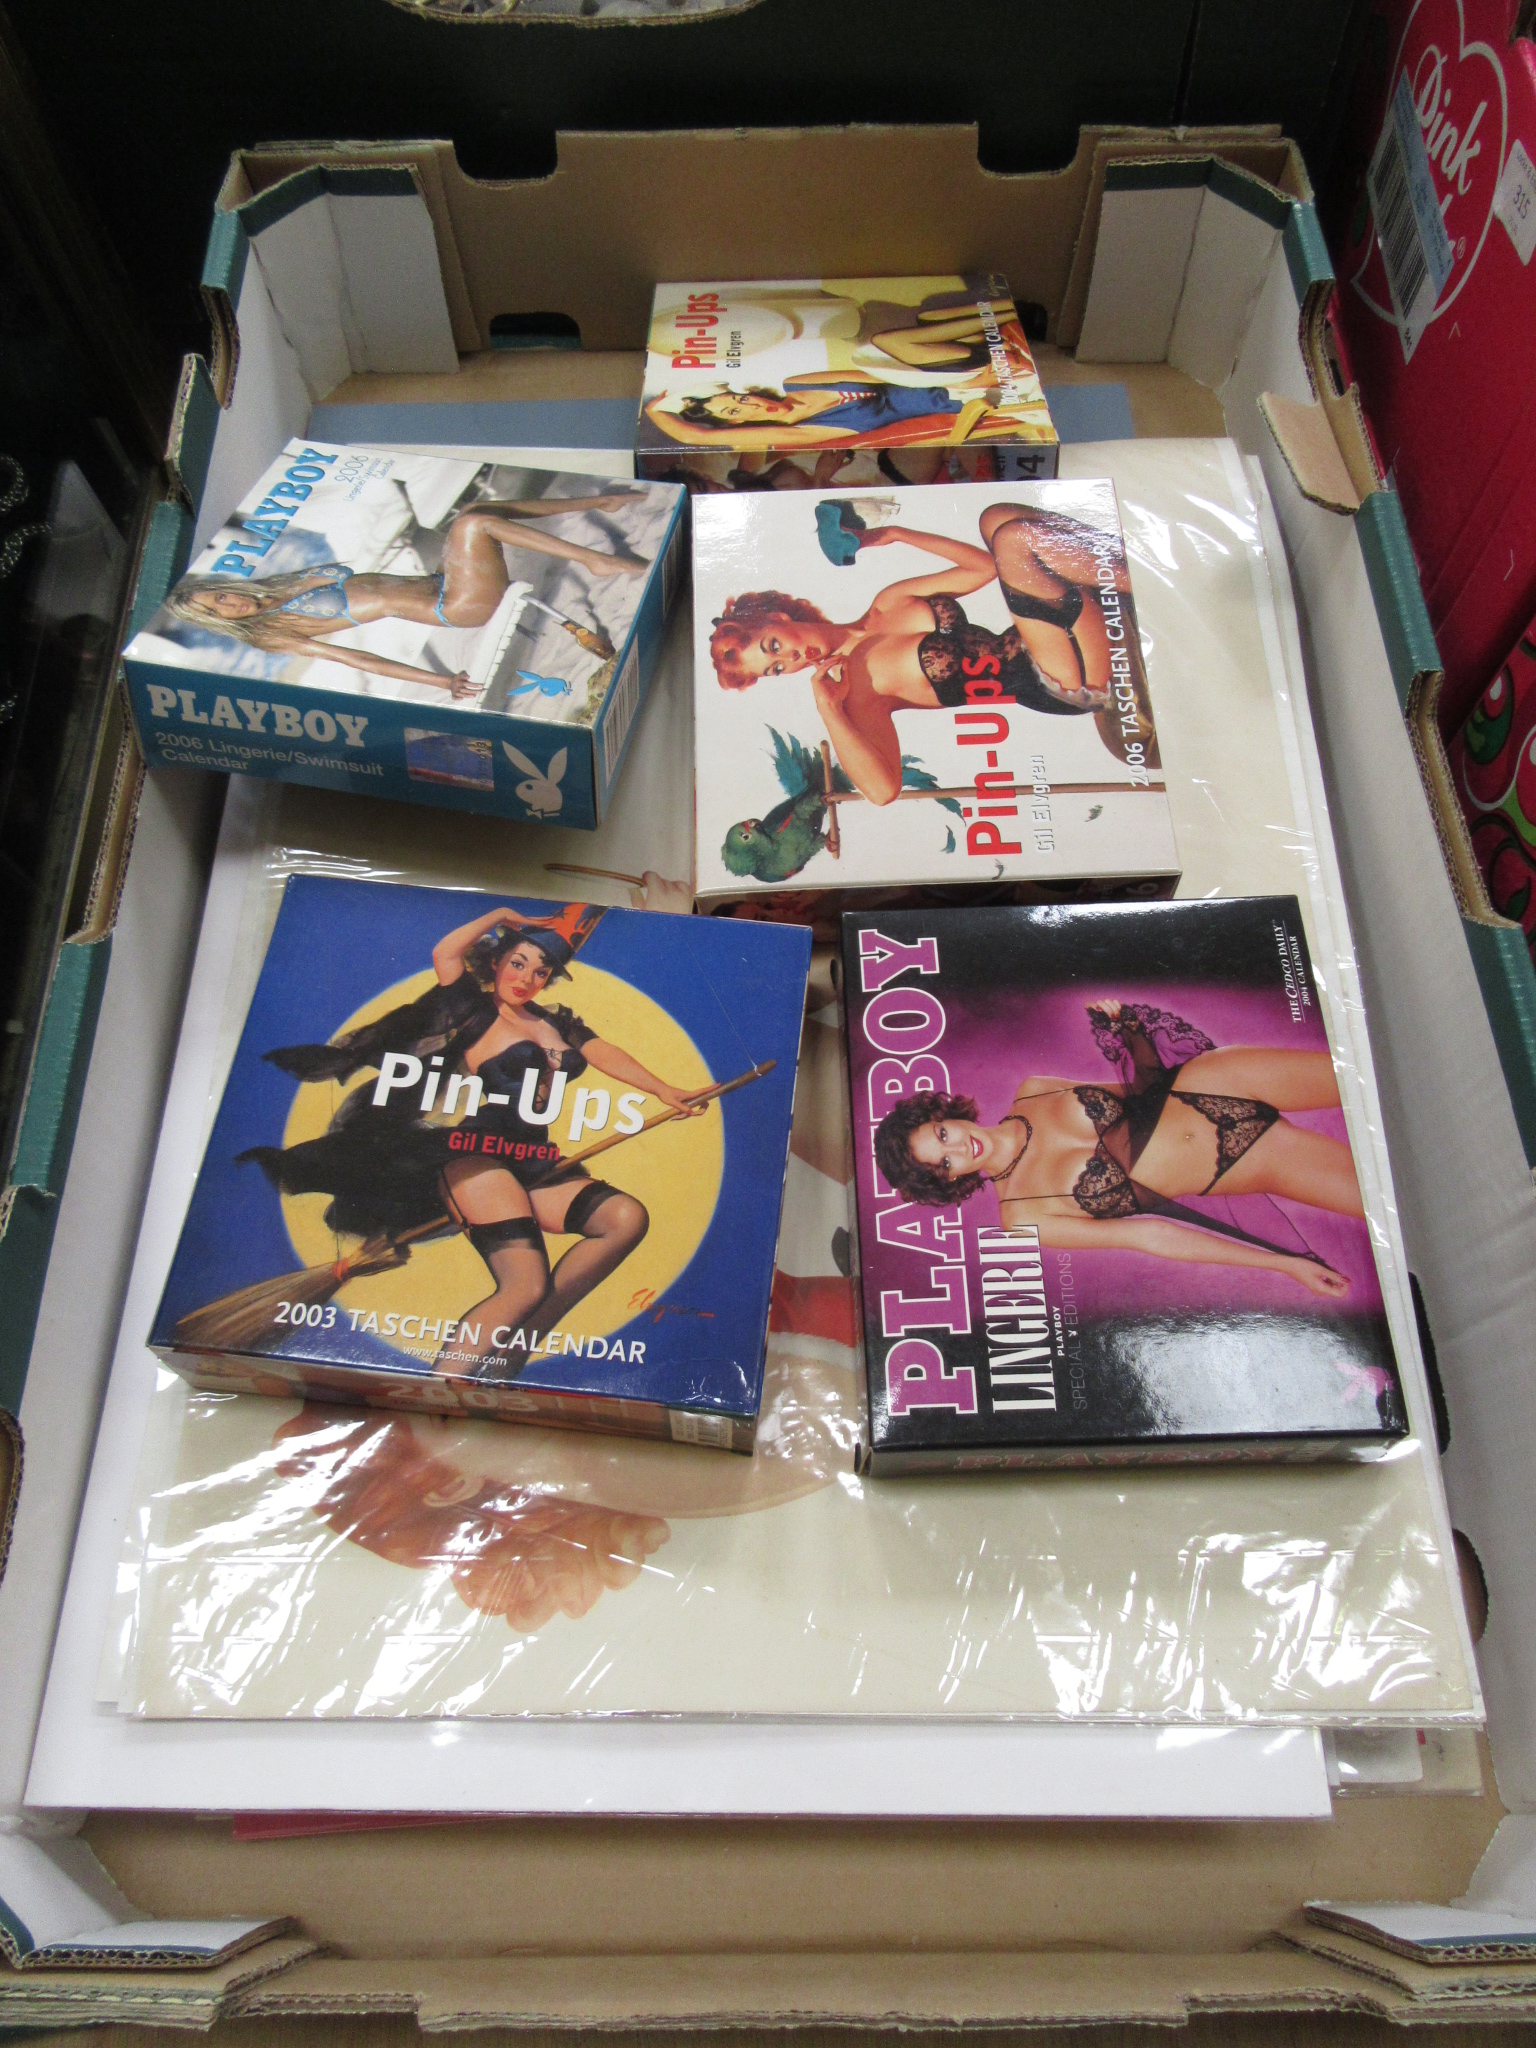 A tray containing Playboy boxed calendars, mounted calendars etc.